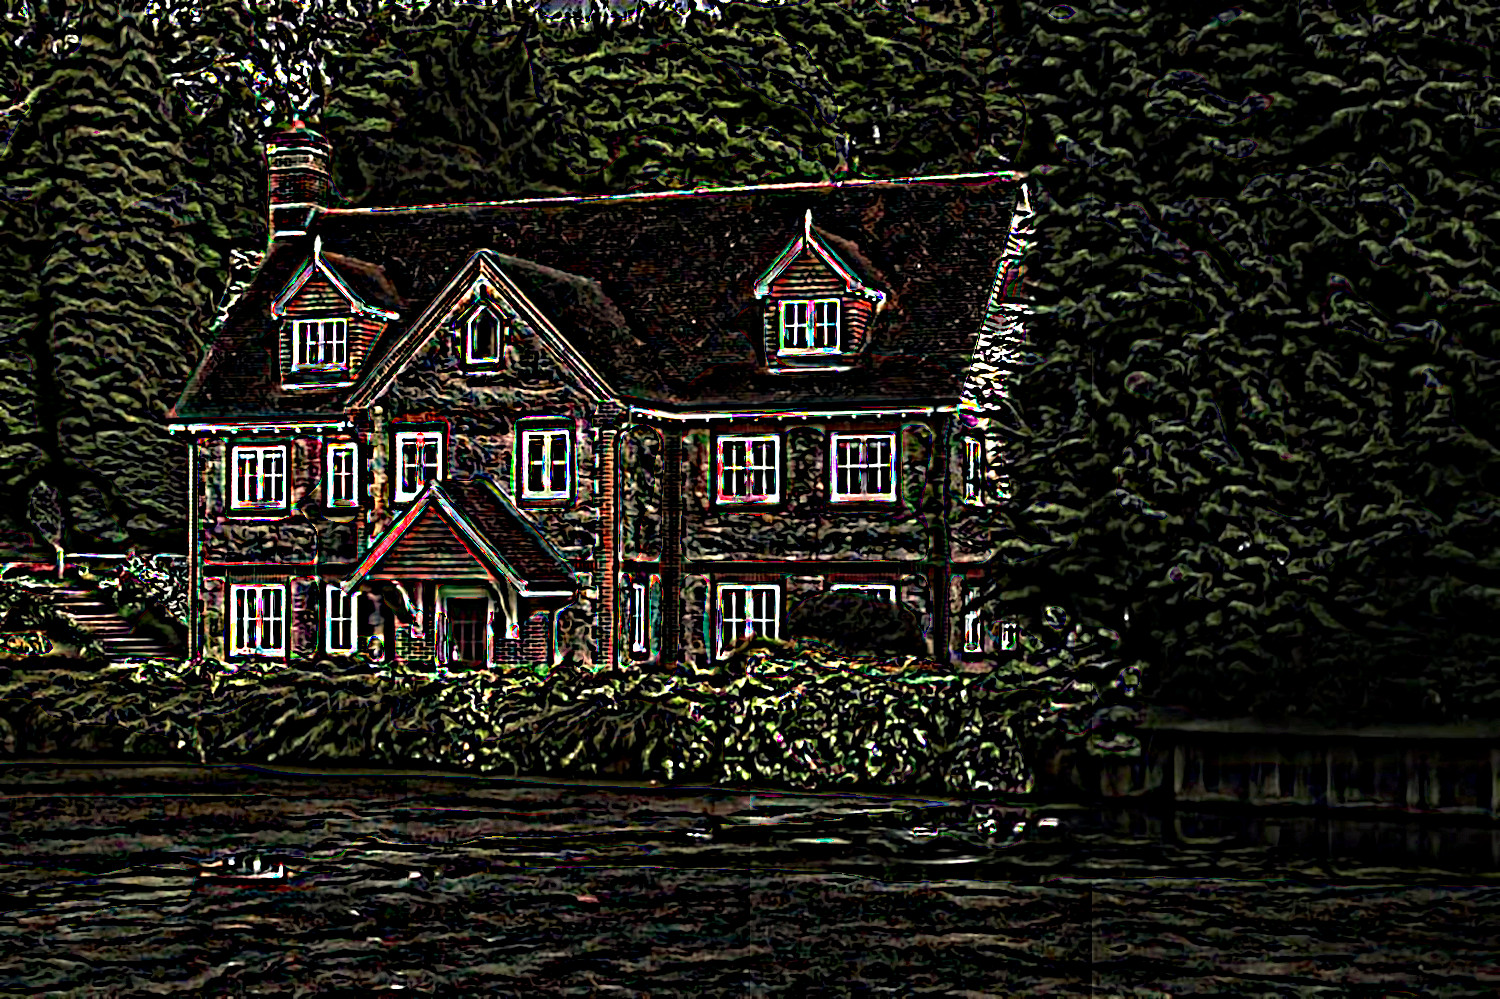 house_beside_a_lake_by_udochristmann_dc8j30t_DN_SoftColourPencilsOnBlack_Issa.JPG